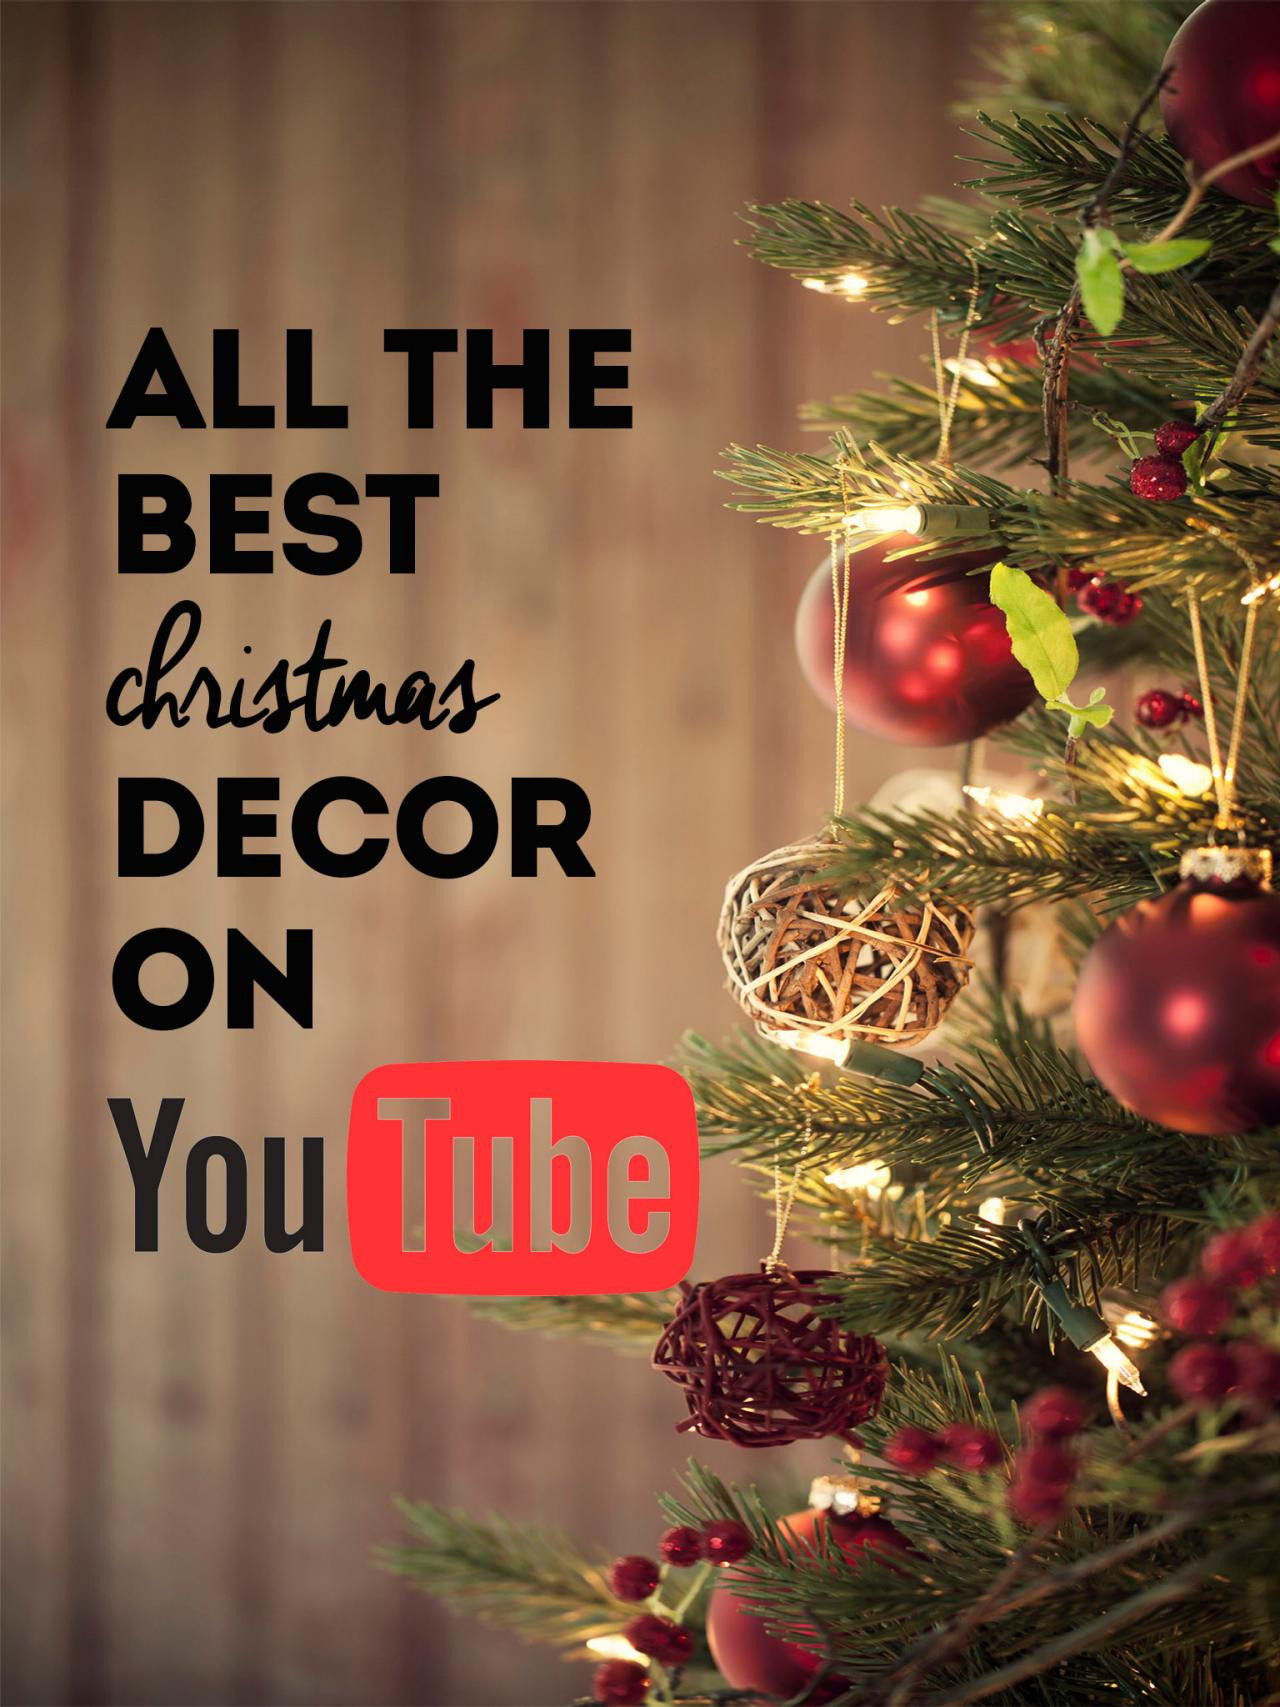 Christmas Youtube Video Ideas
 11 youtube videos to watch for fun holiday decor ideas